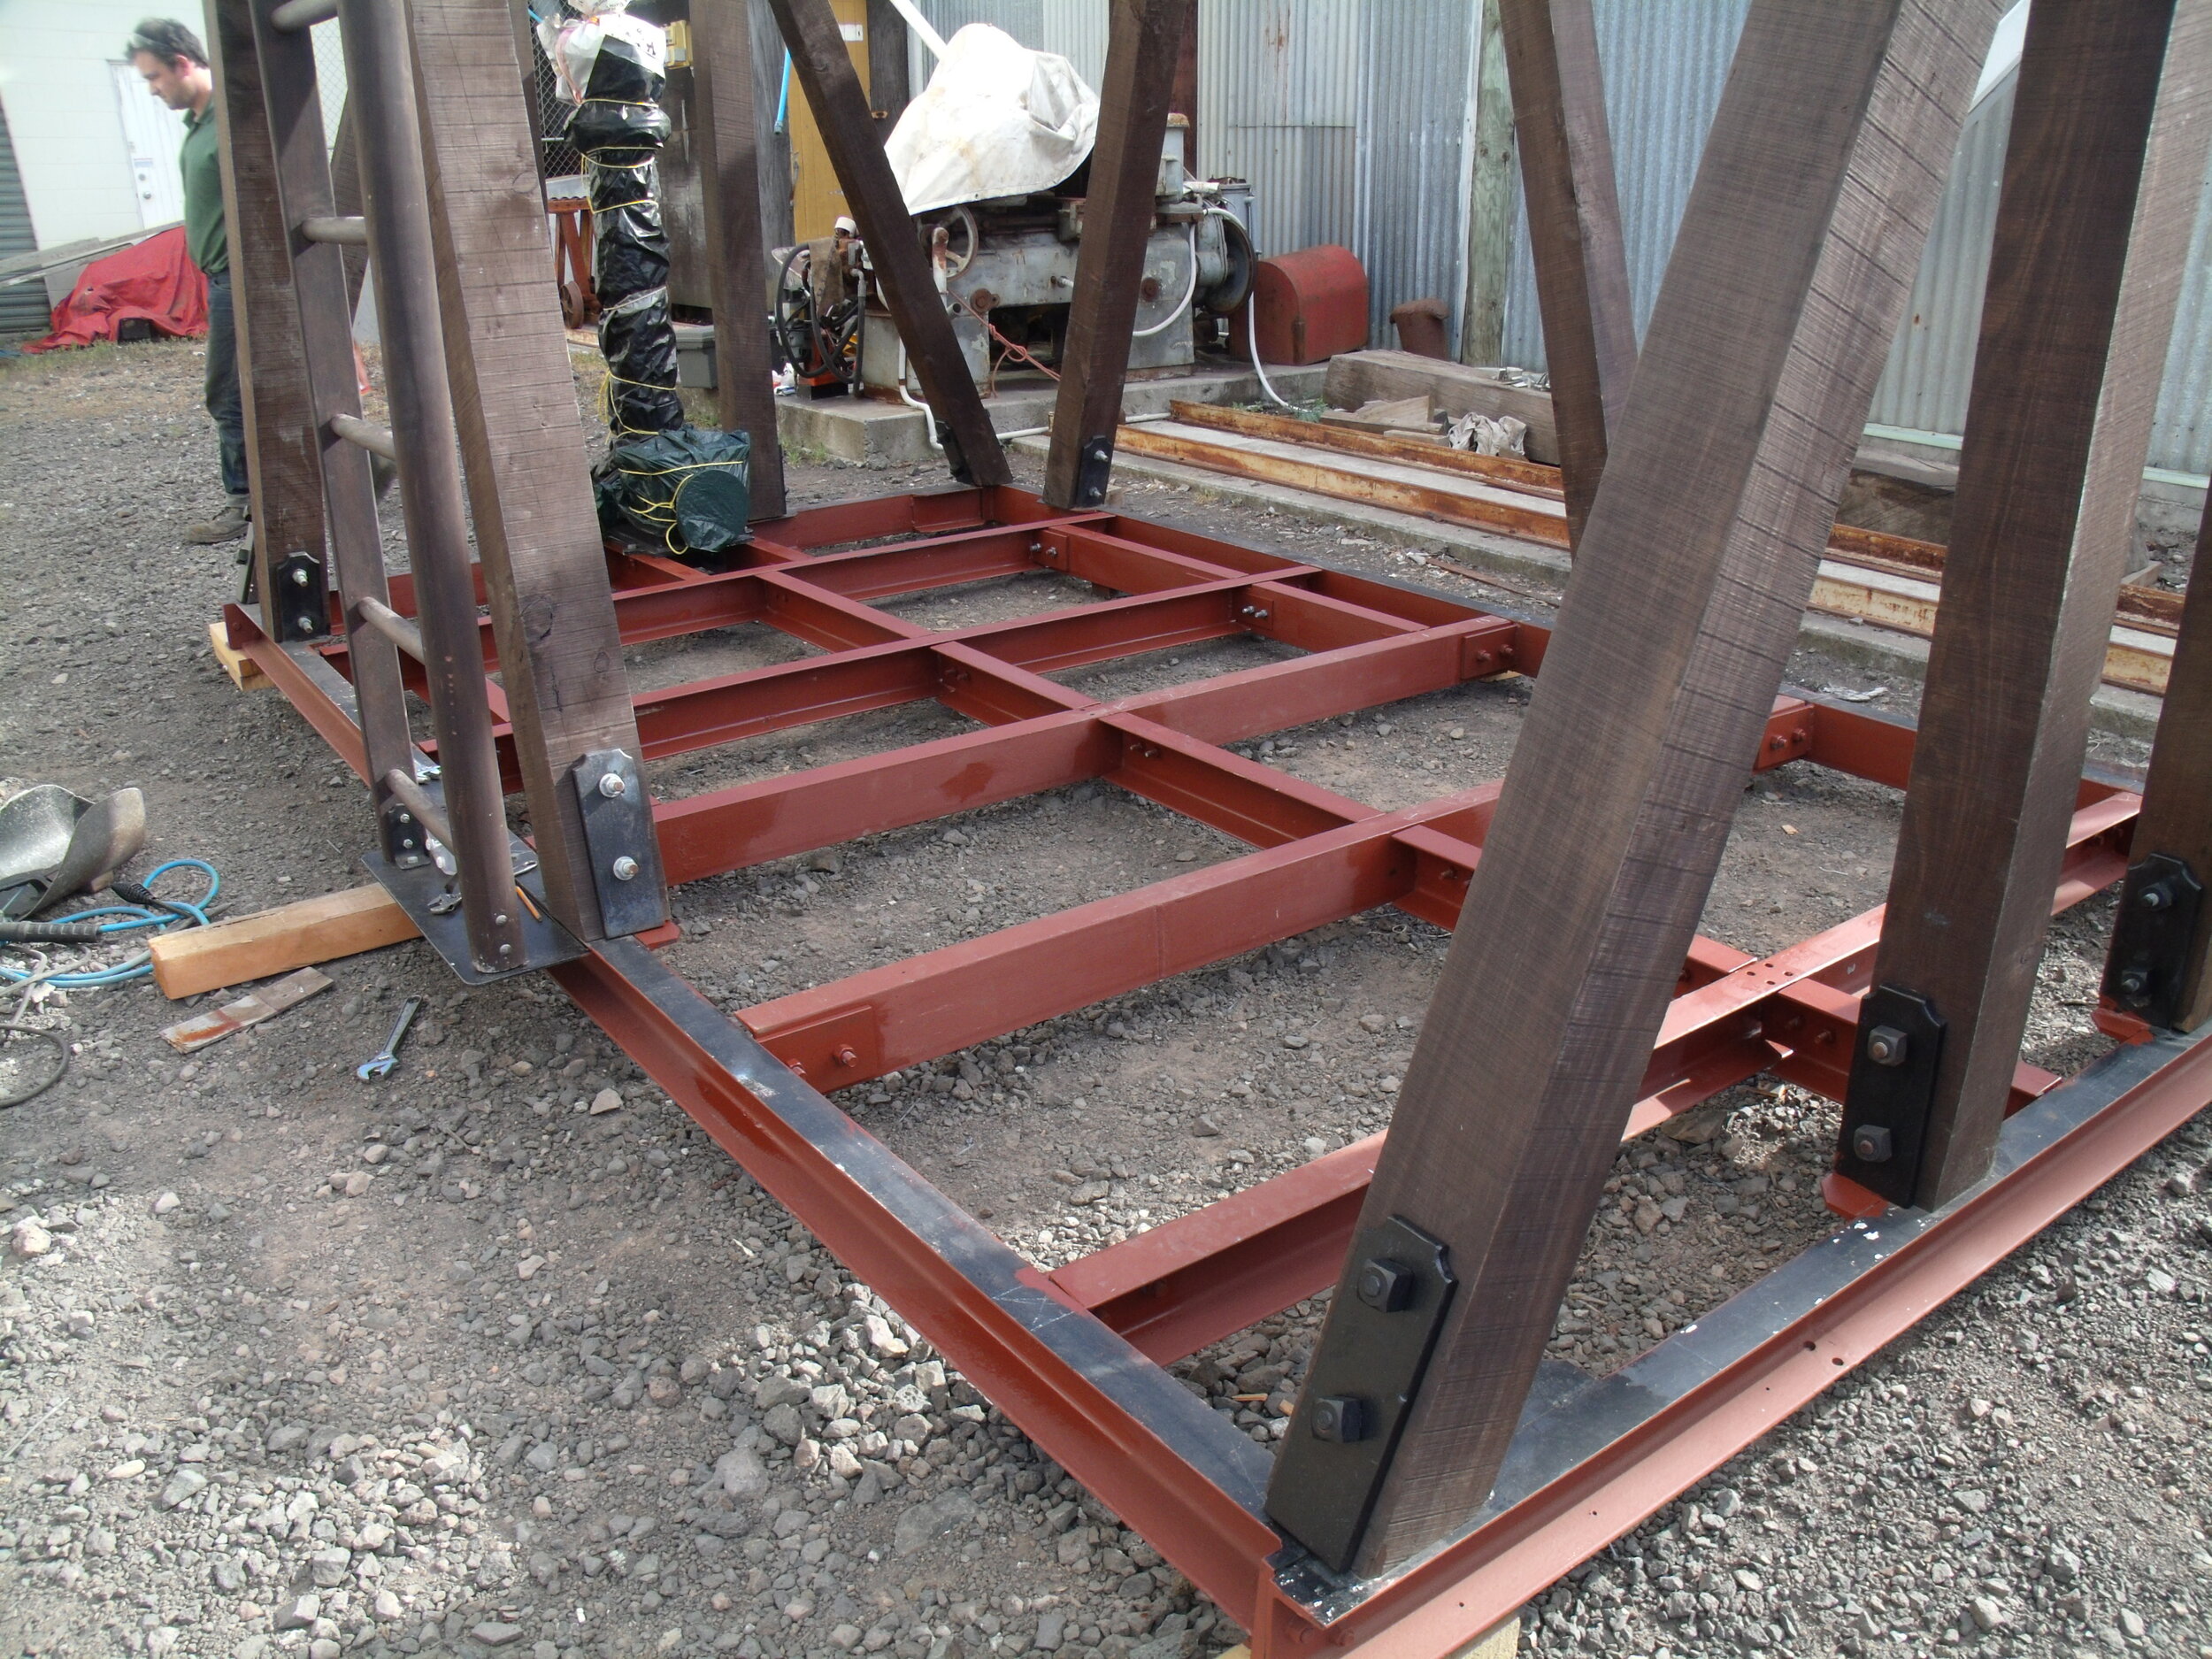 The steel base assembly